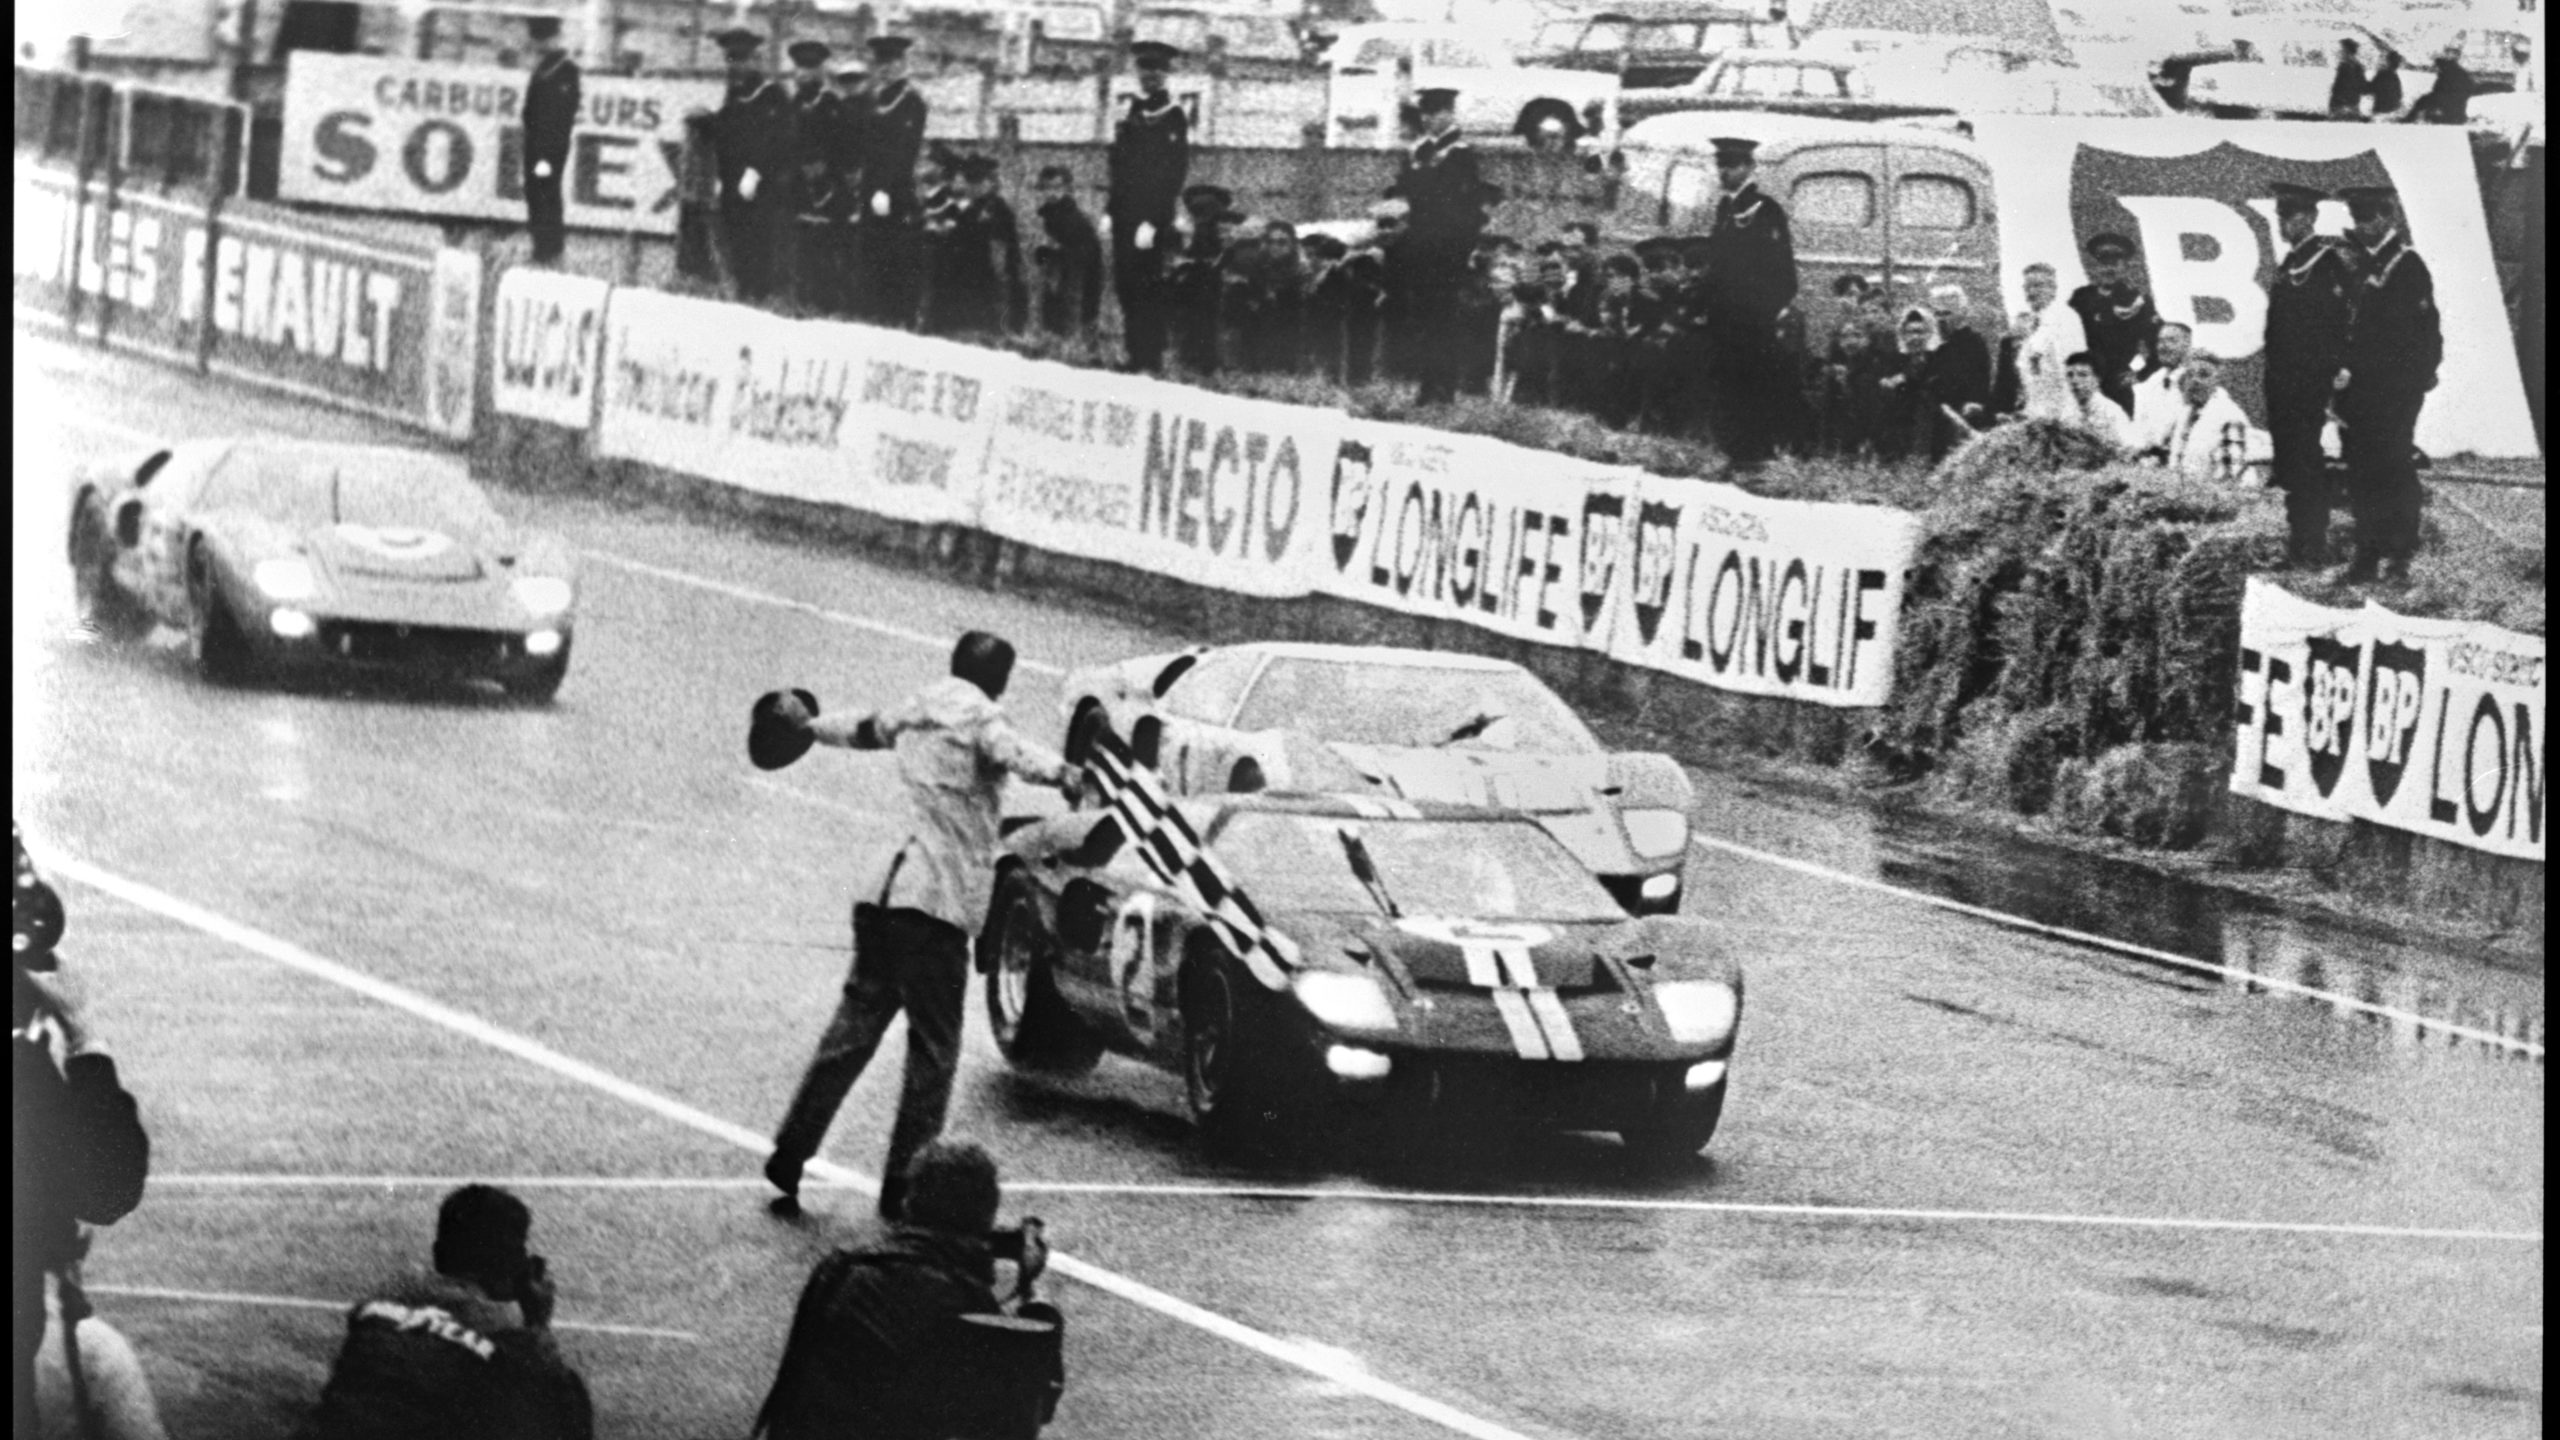 Trio of Ford GT40 Mk IIs cross finish line at Le Mans 1966